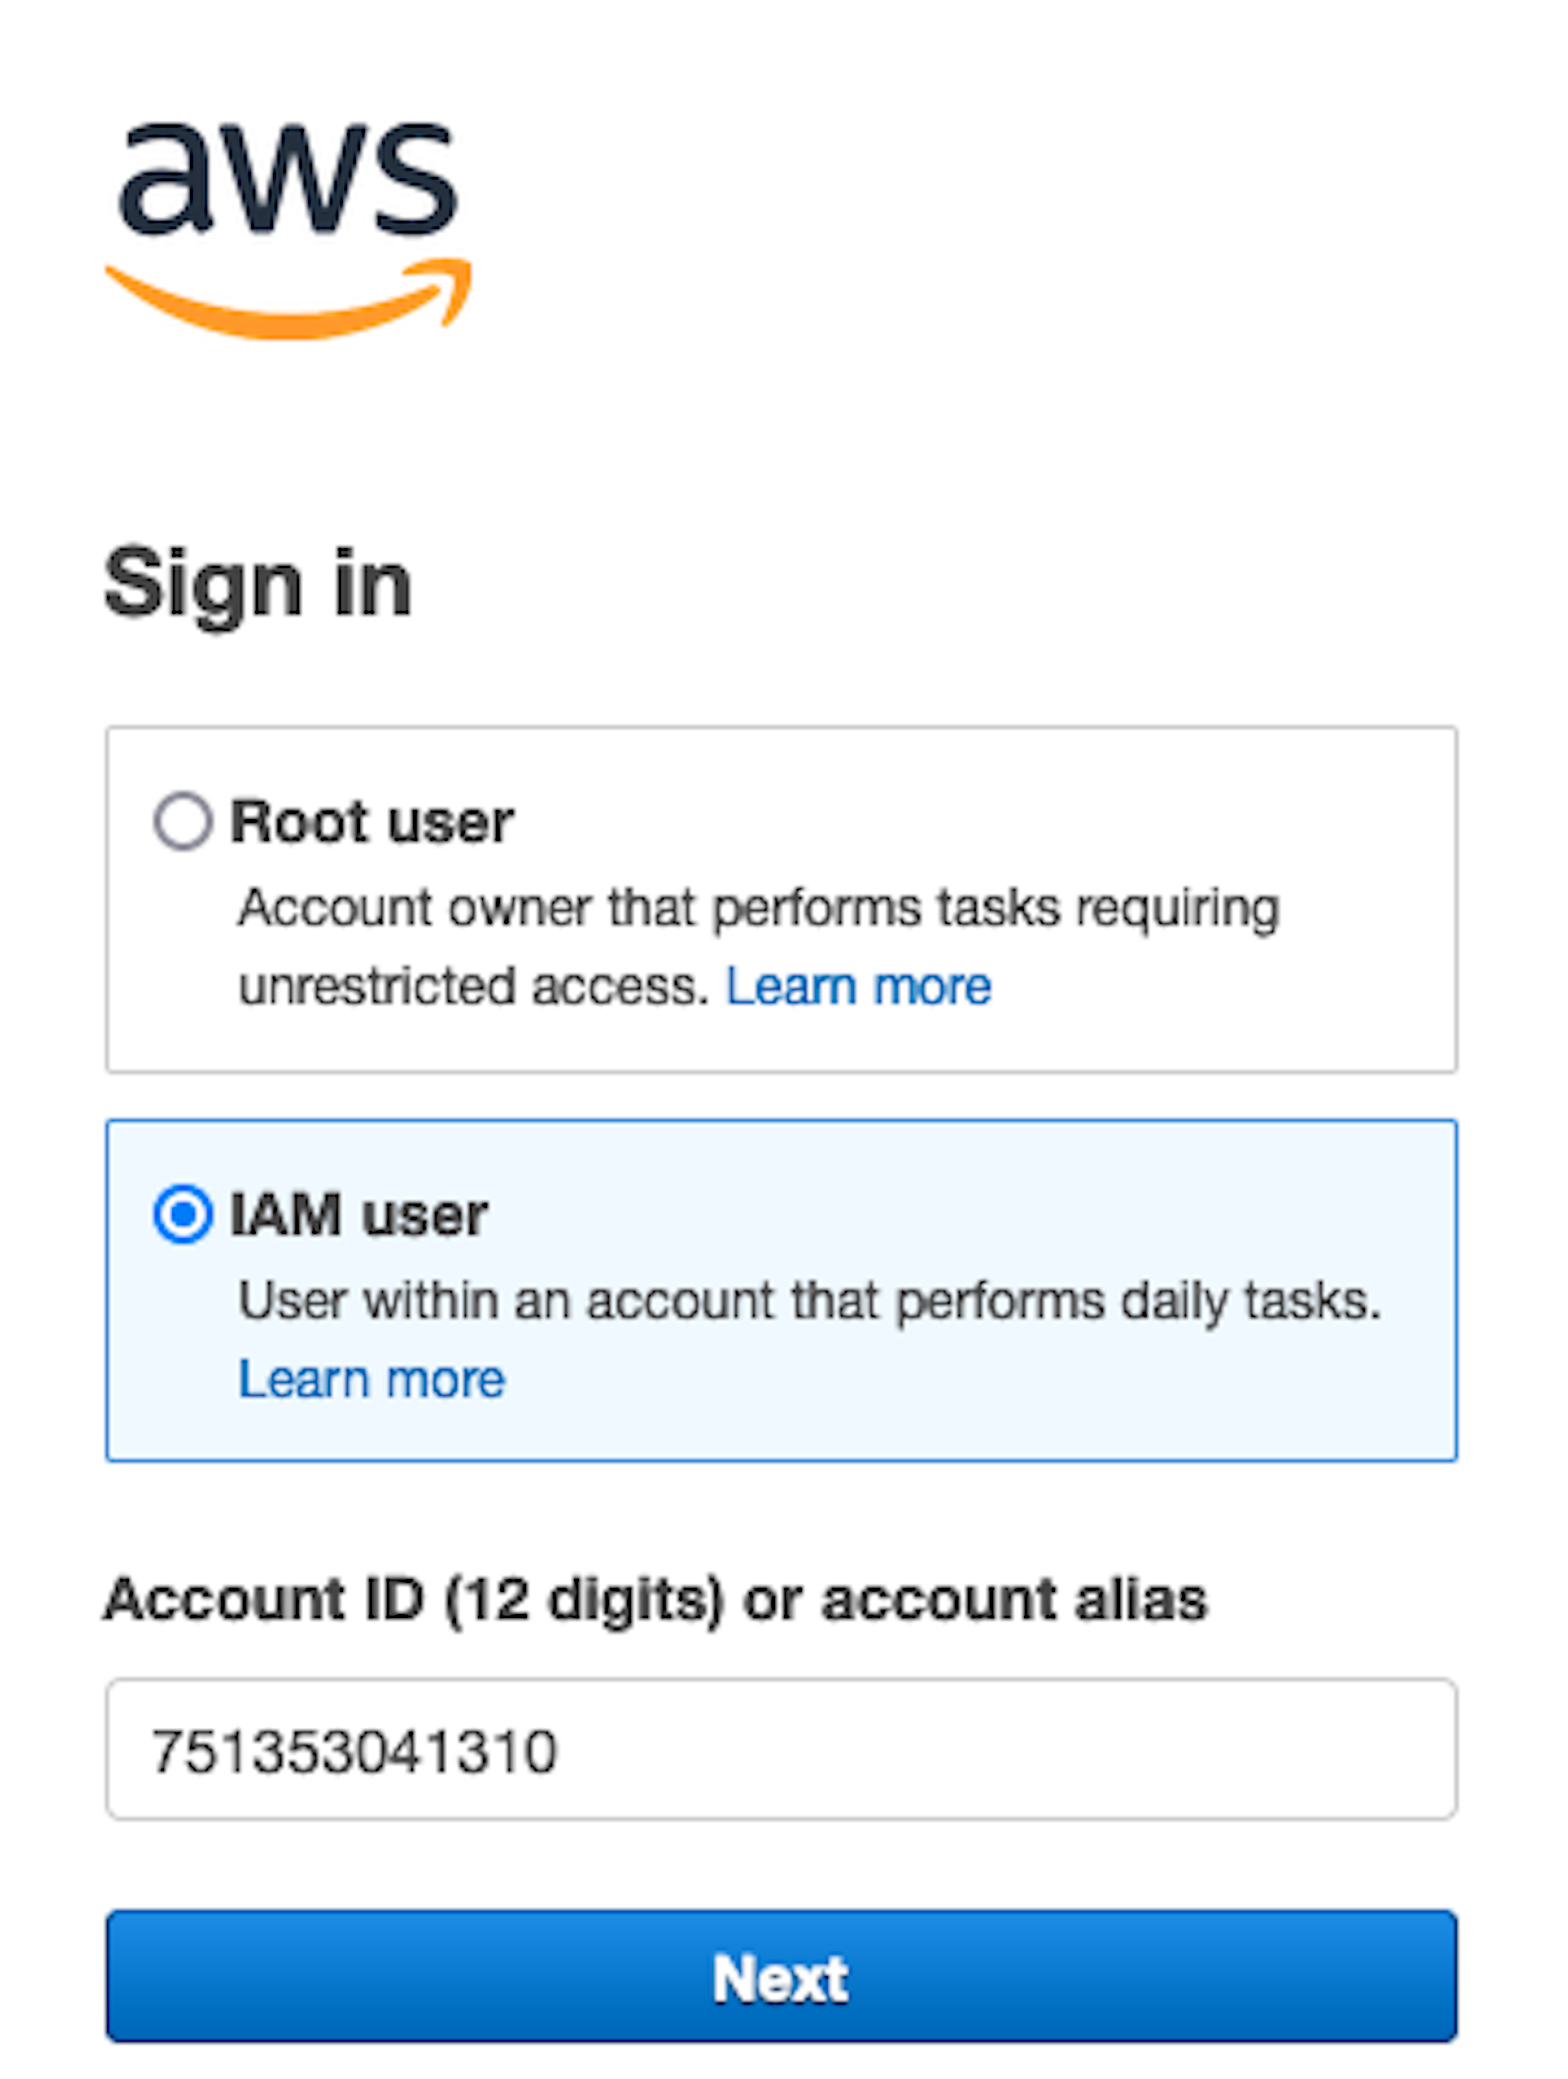 Logging in to the AWS Console